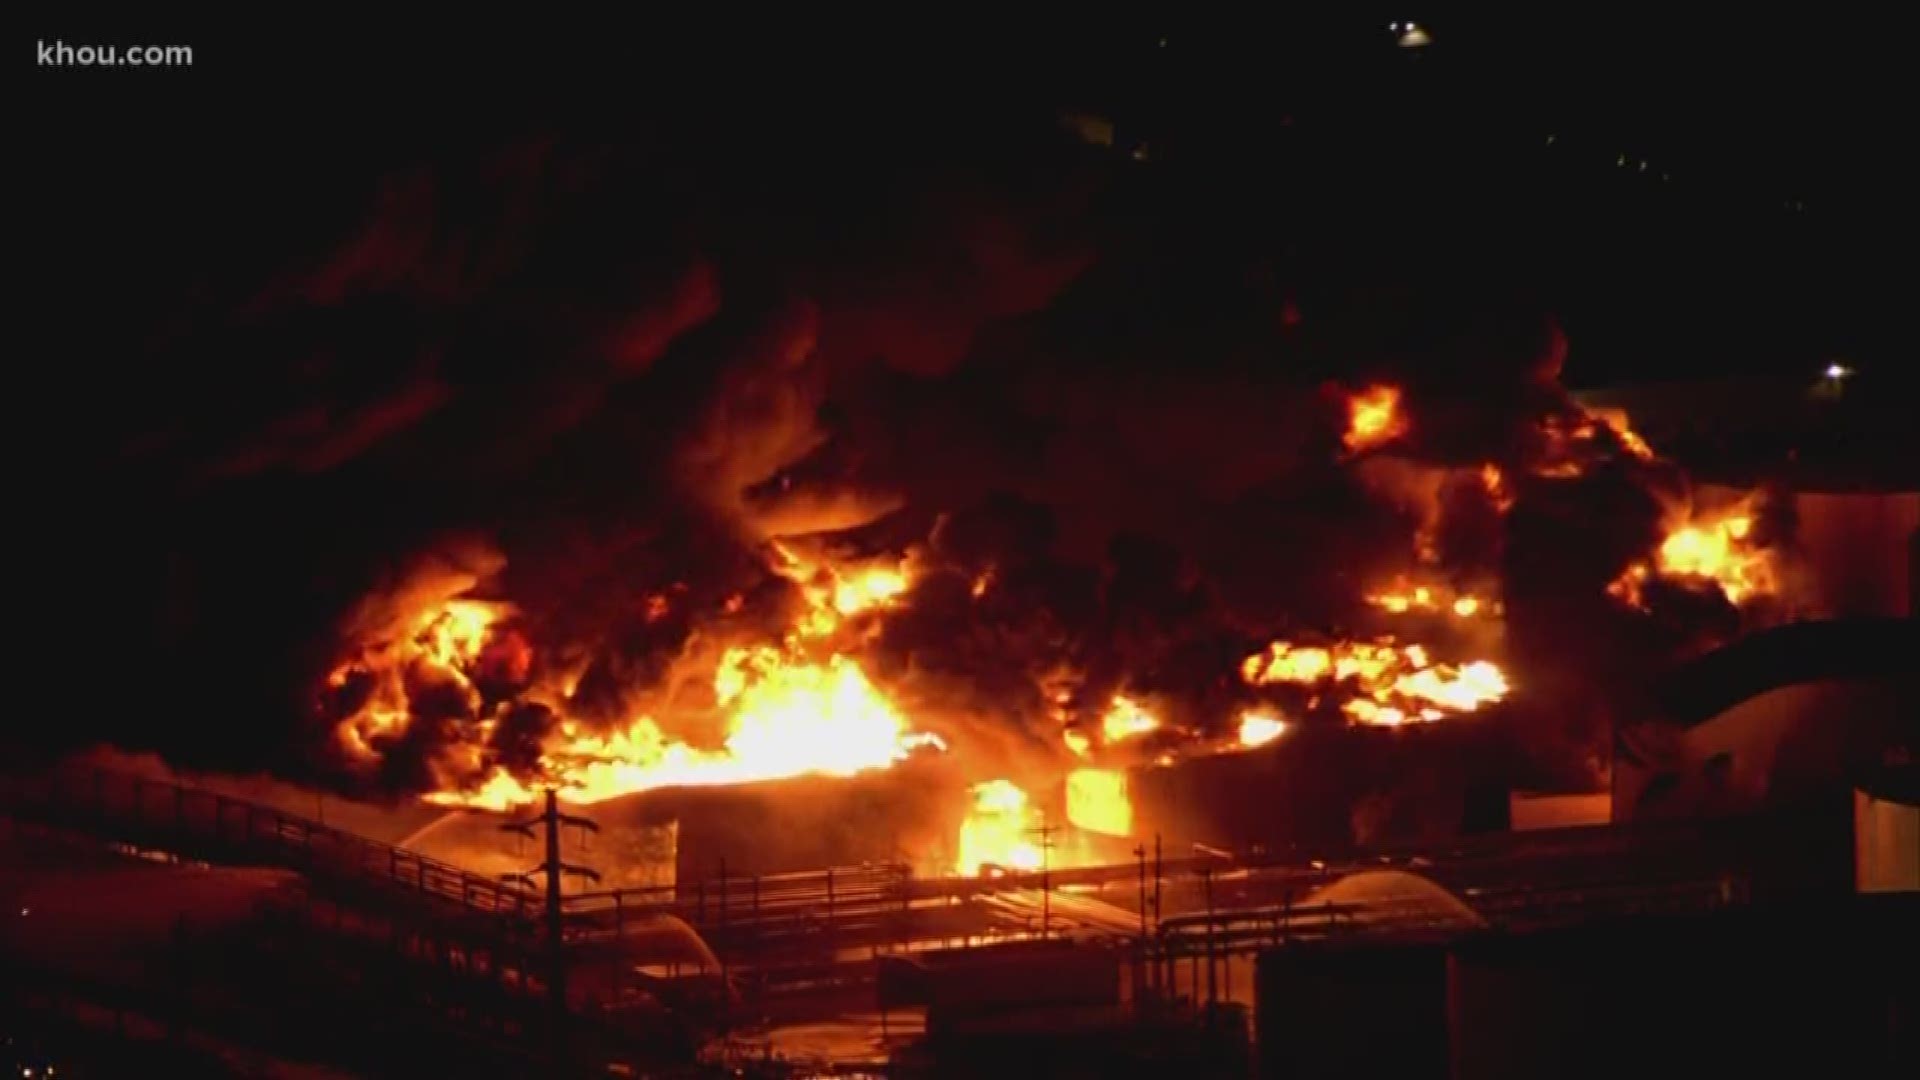 A large fire at Intercontinental Terminals Company in La Porte continued to burn Monday night, spreading to an additional six tanks earlier in the afternoon